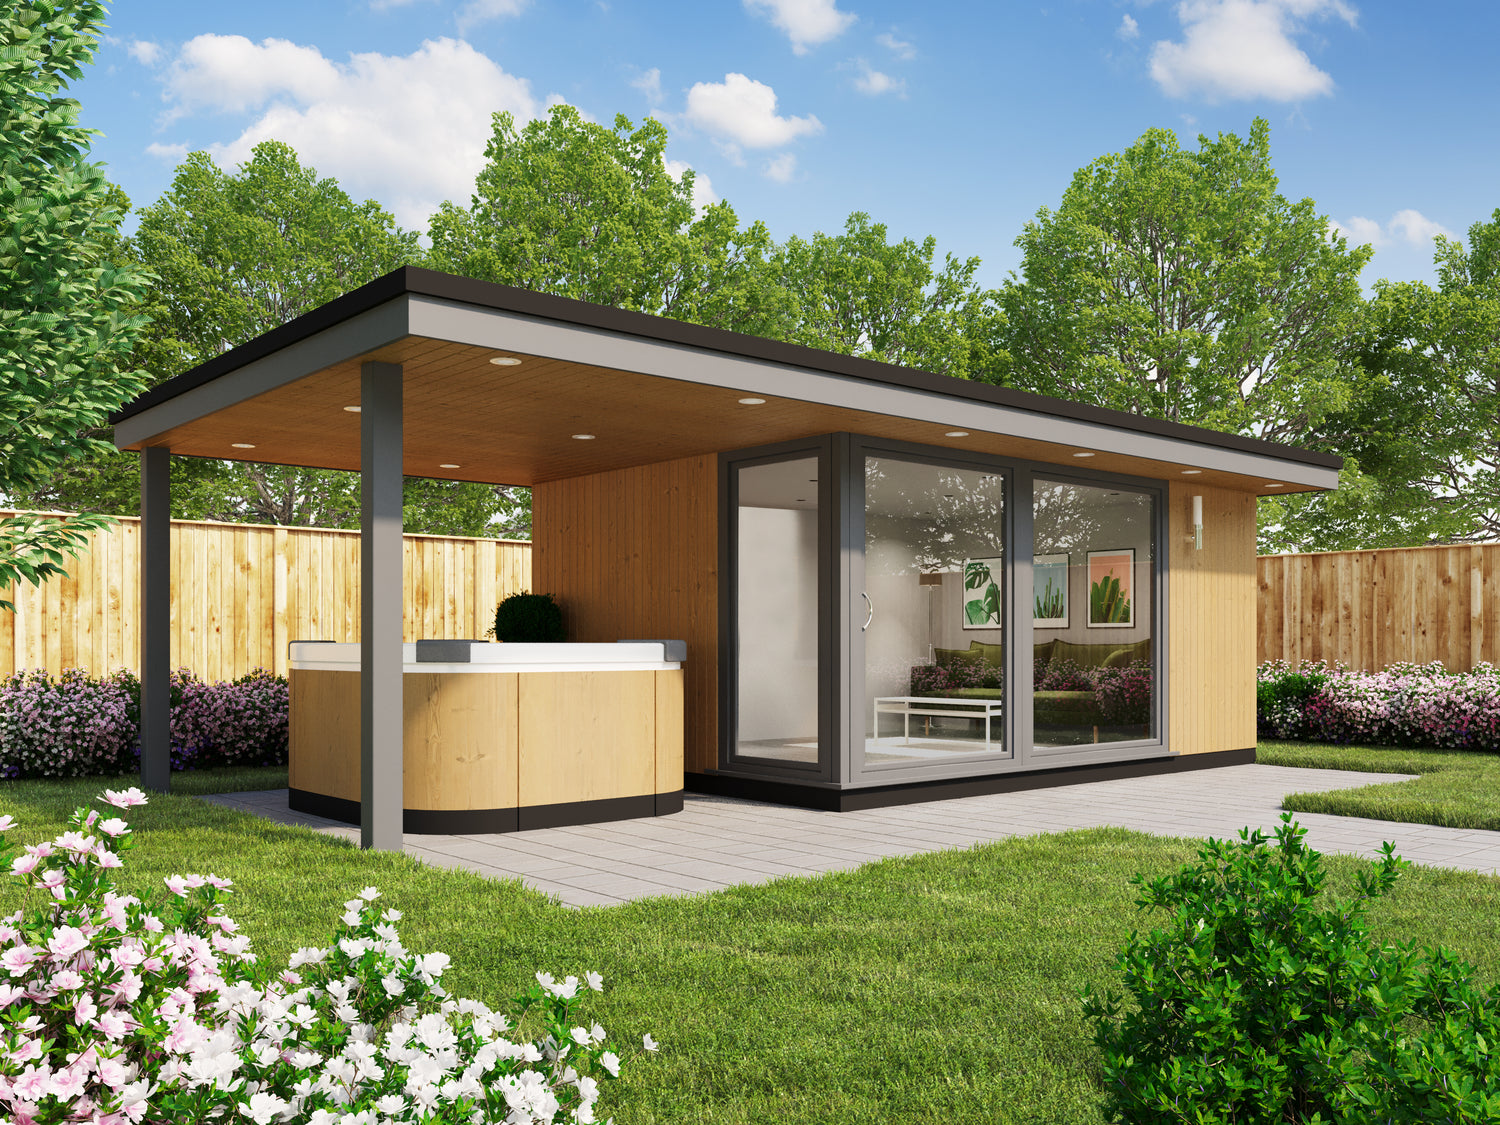 A garden room with a large side canopy and hot tub.